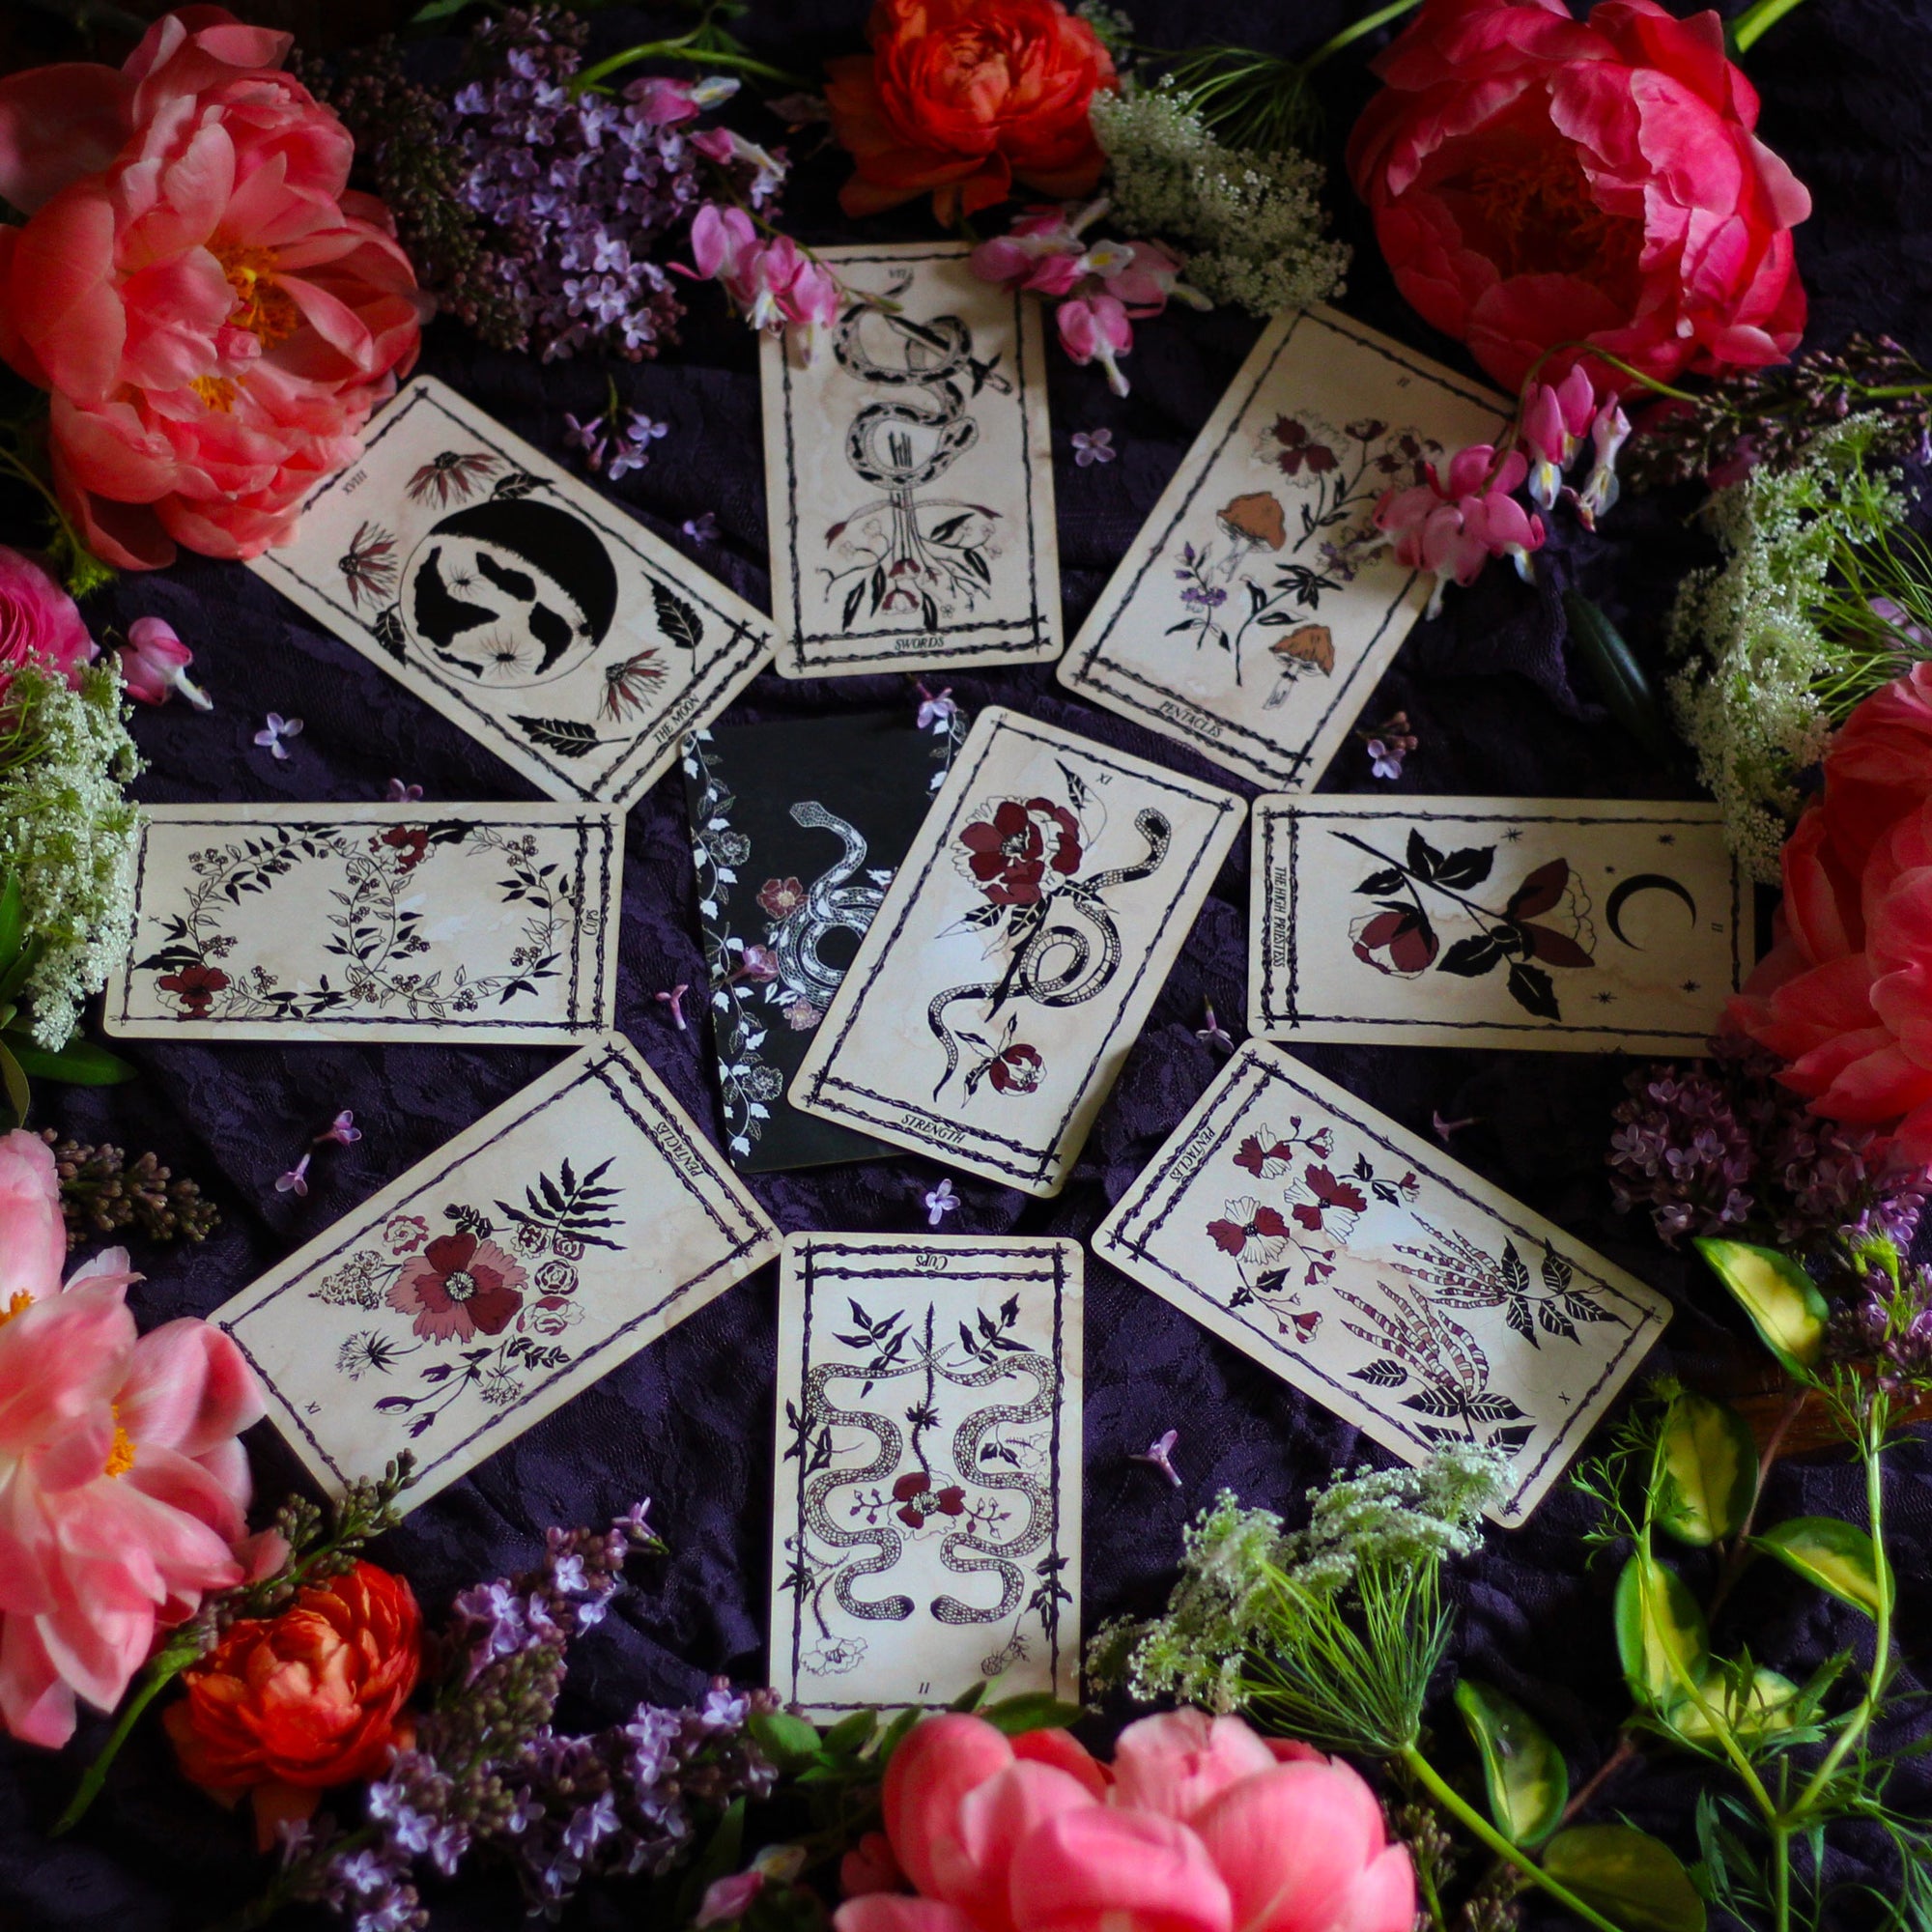 Botanical Tarot deck, the Ophidia Rosa, is illustrated by hand and rooted in the natural realm. Through these 78 botanical tarot cards, the major and minor arcana, we weave together traditional Tarot meanings with poetry, mythology, flora and plants.